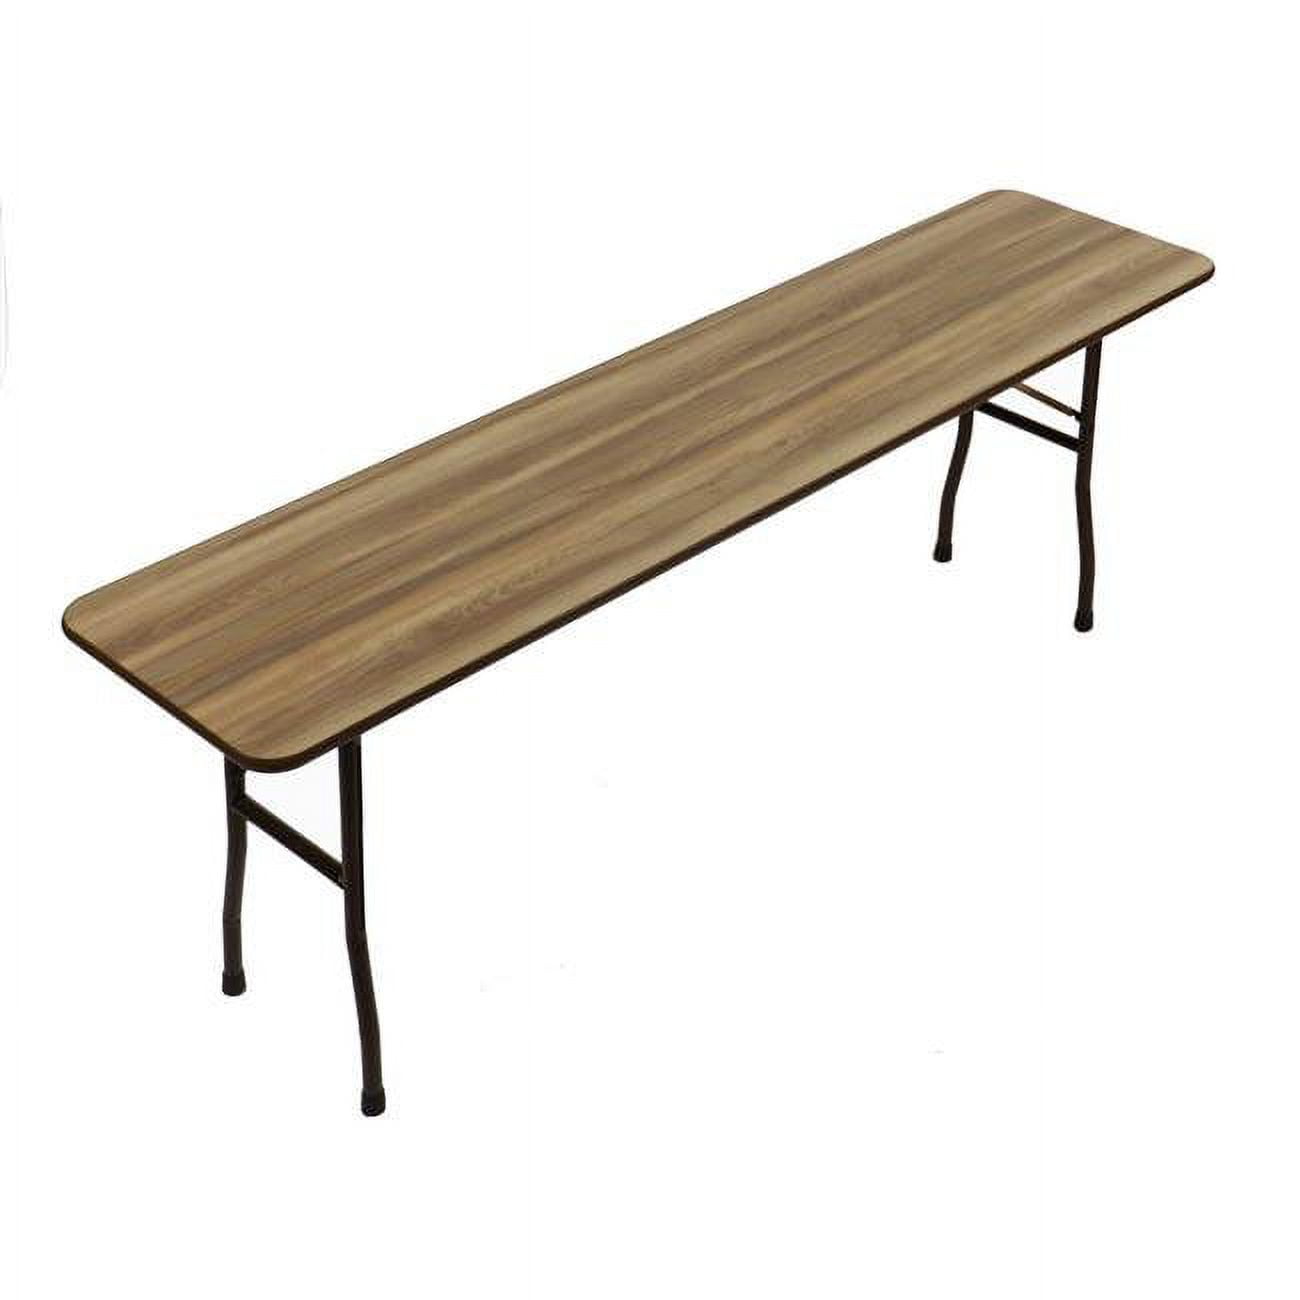 Picture of Correll CF3072PX-53 0.75 in. High Pressure Rectangular Top Folding Tables, Colonial Hickory - 30 x 72 in.